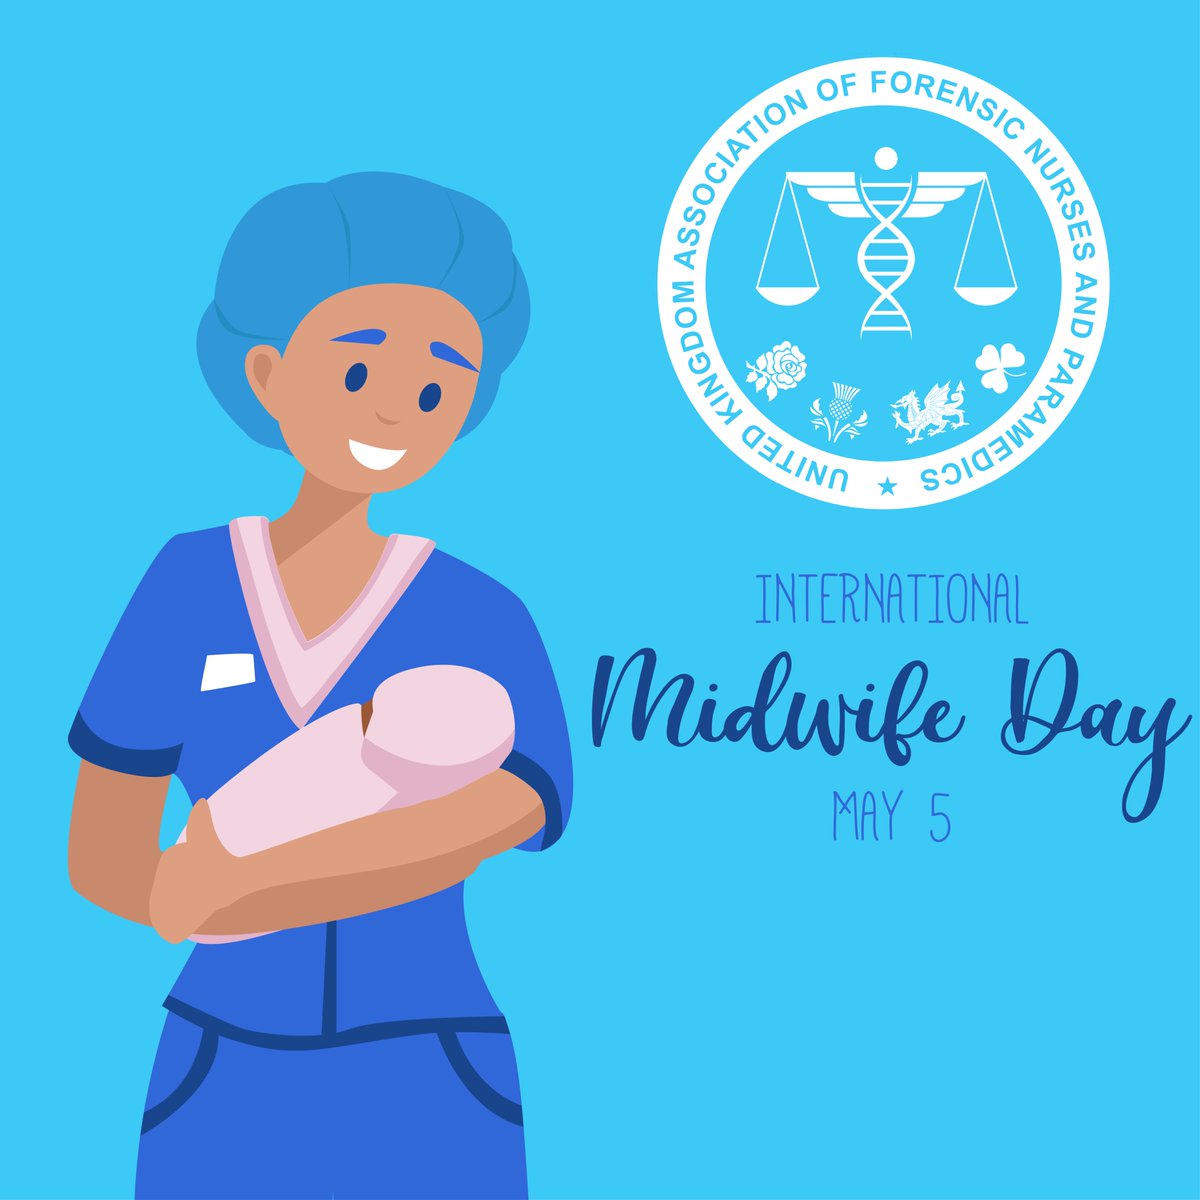 Today, on #InternationalMidwivesDay, we celebrate and thank all midwives for their vital role in healthcare, particularly those working in forensic settings. Your expertise and care make a world of difference. Thank you for everything you do! 🌍💙 #UKAFNP #MidwivesDay